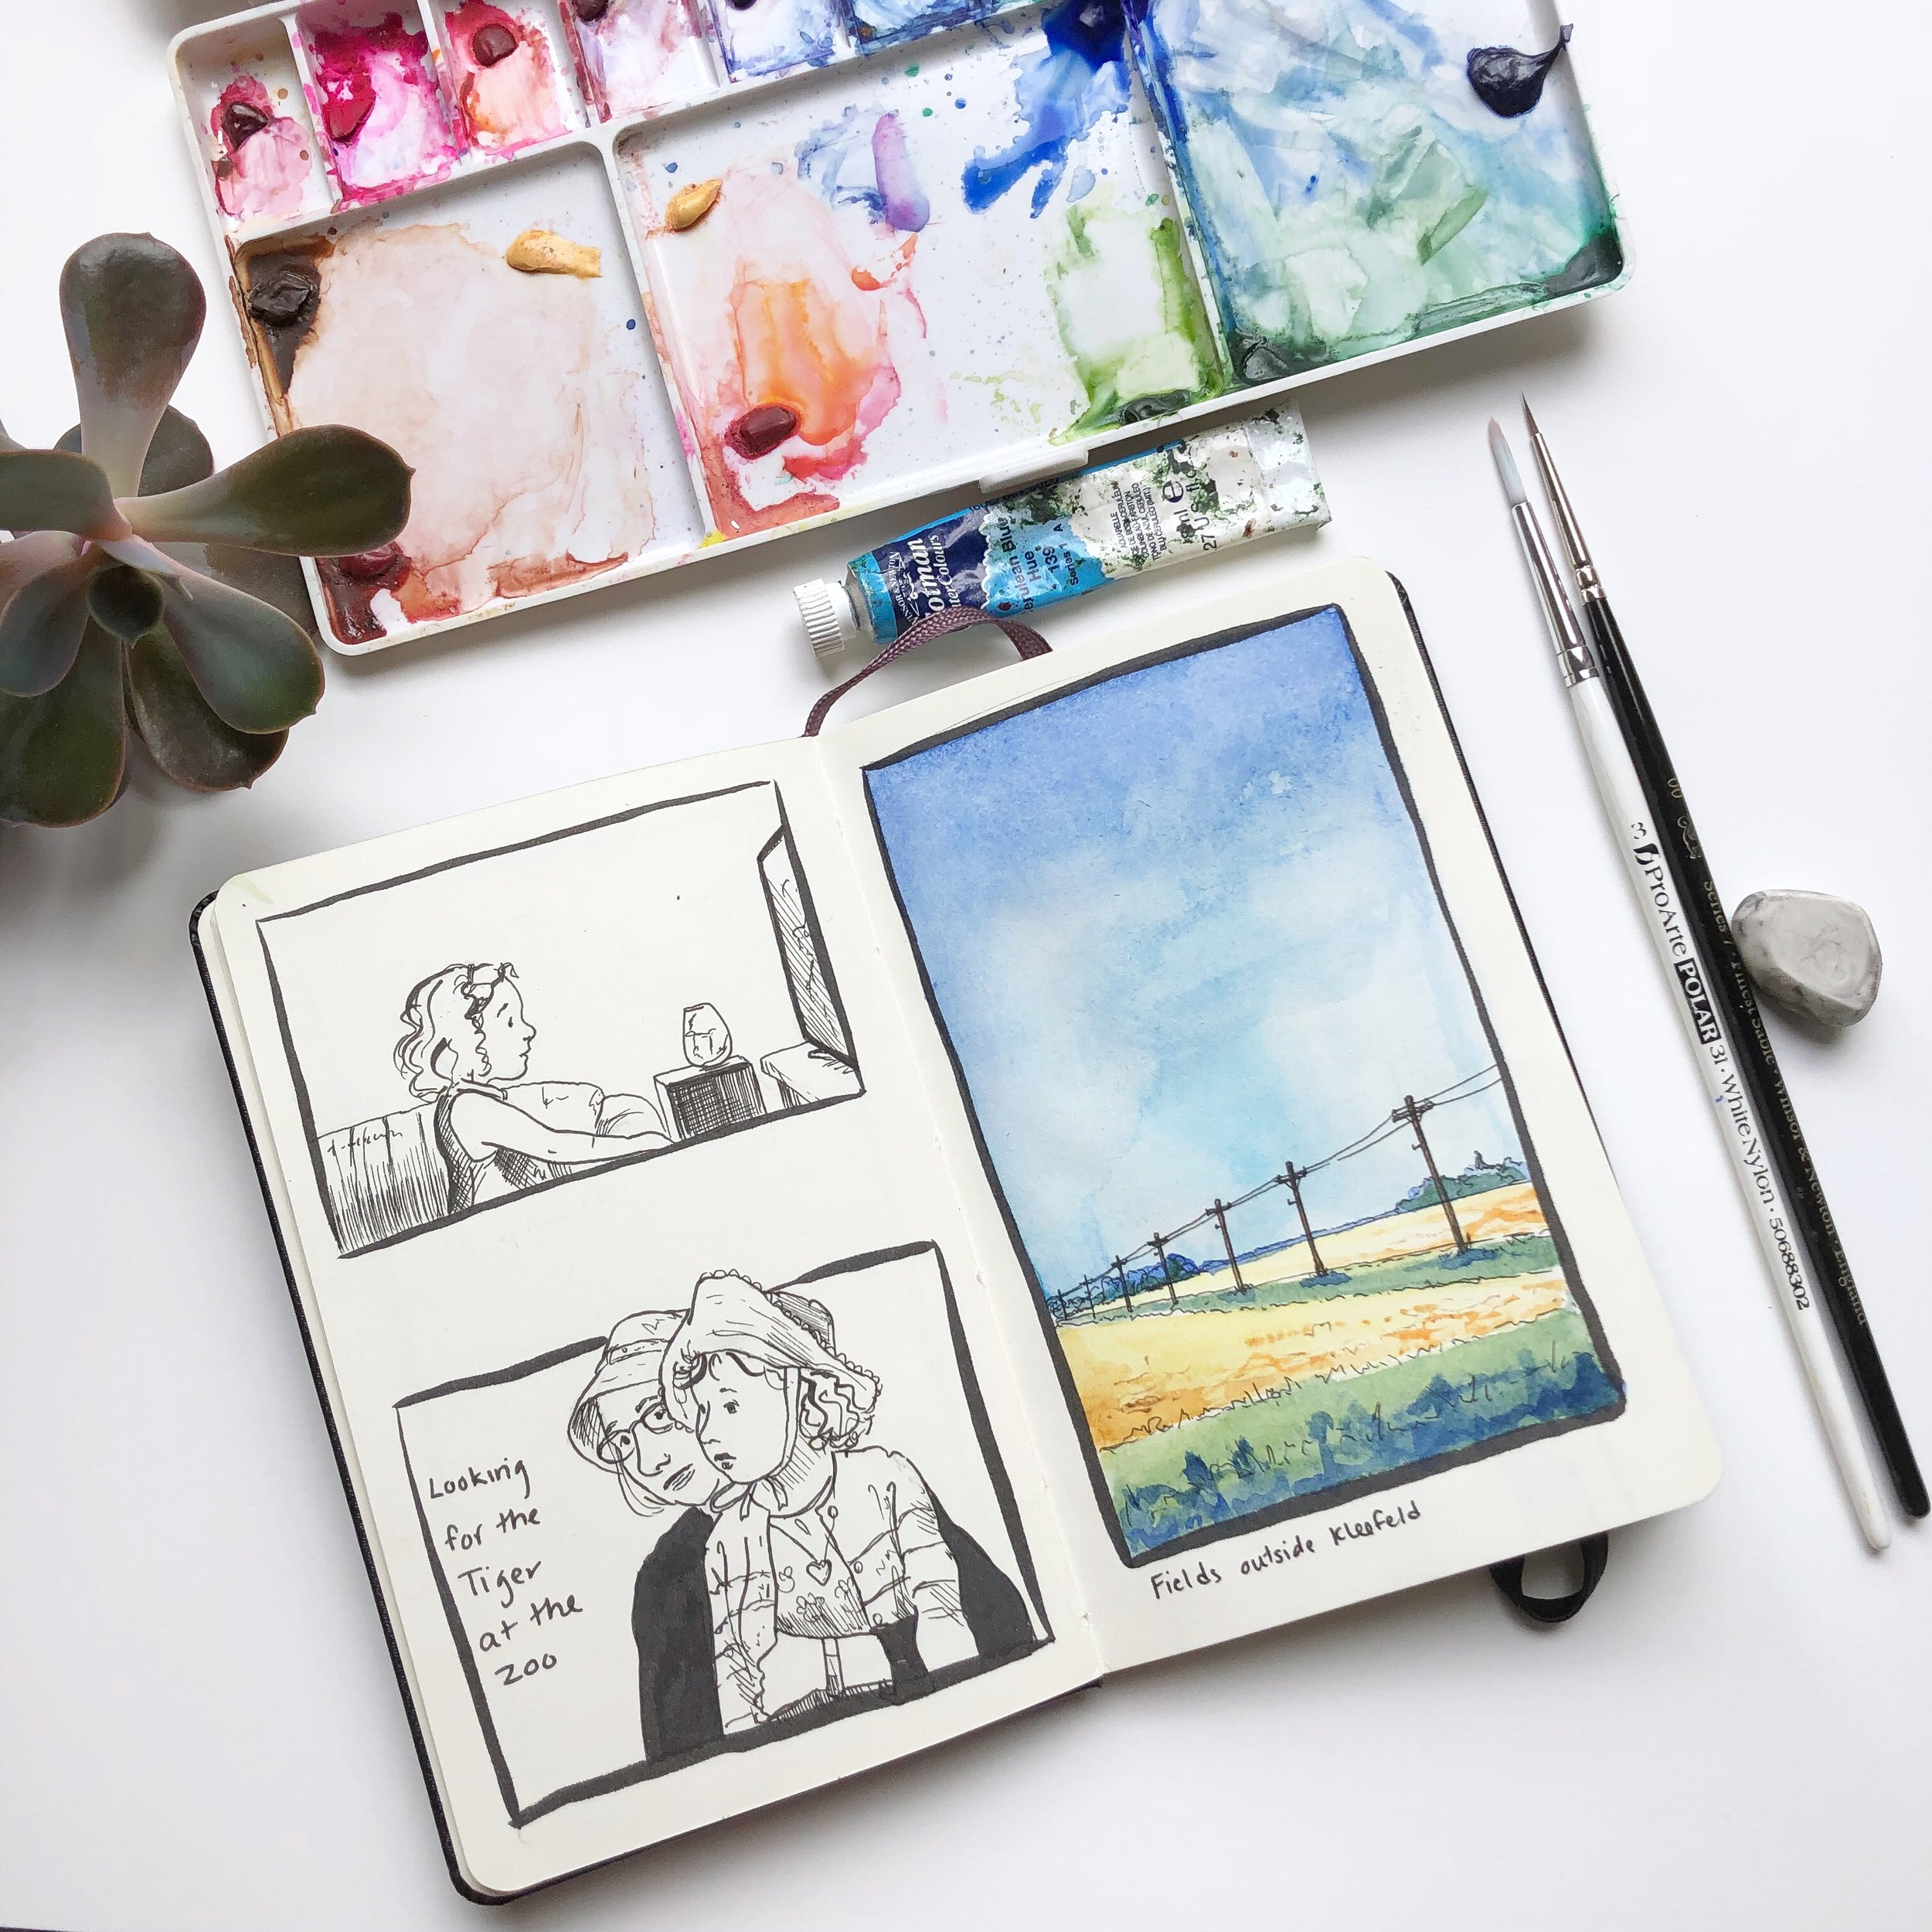 Design Stack: A Blog about Art, Design and Architecture: Urban Sketches and  Travel Journals on Moleskine Books